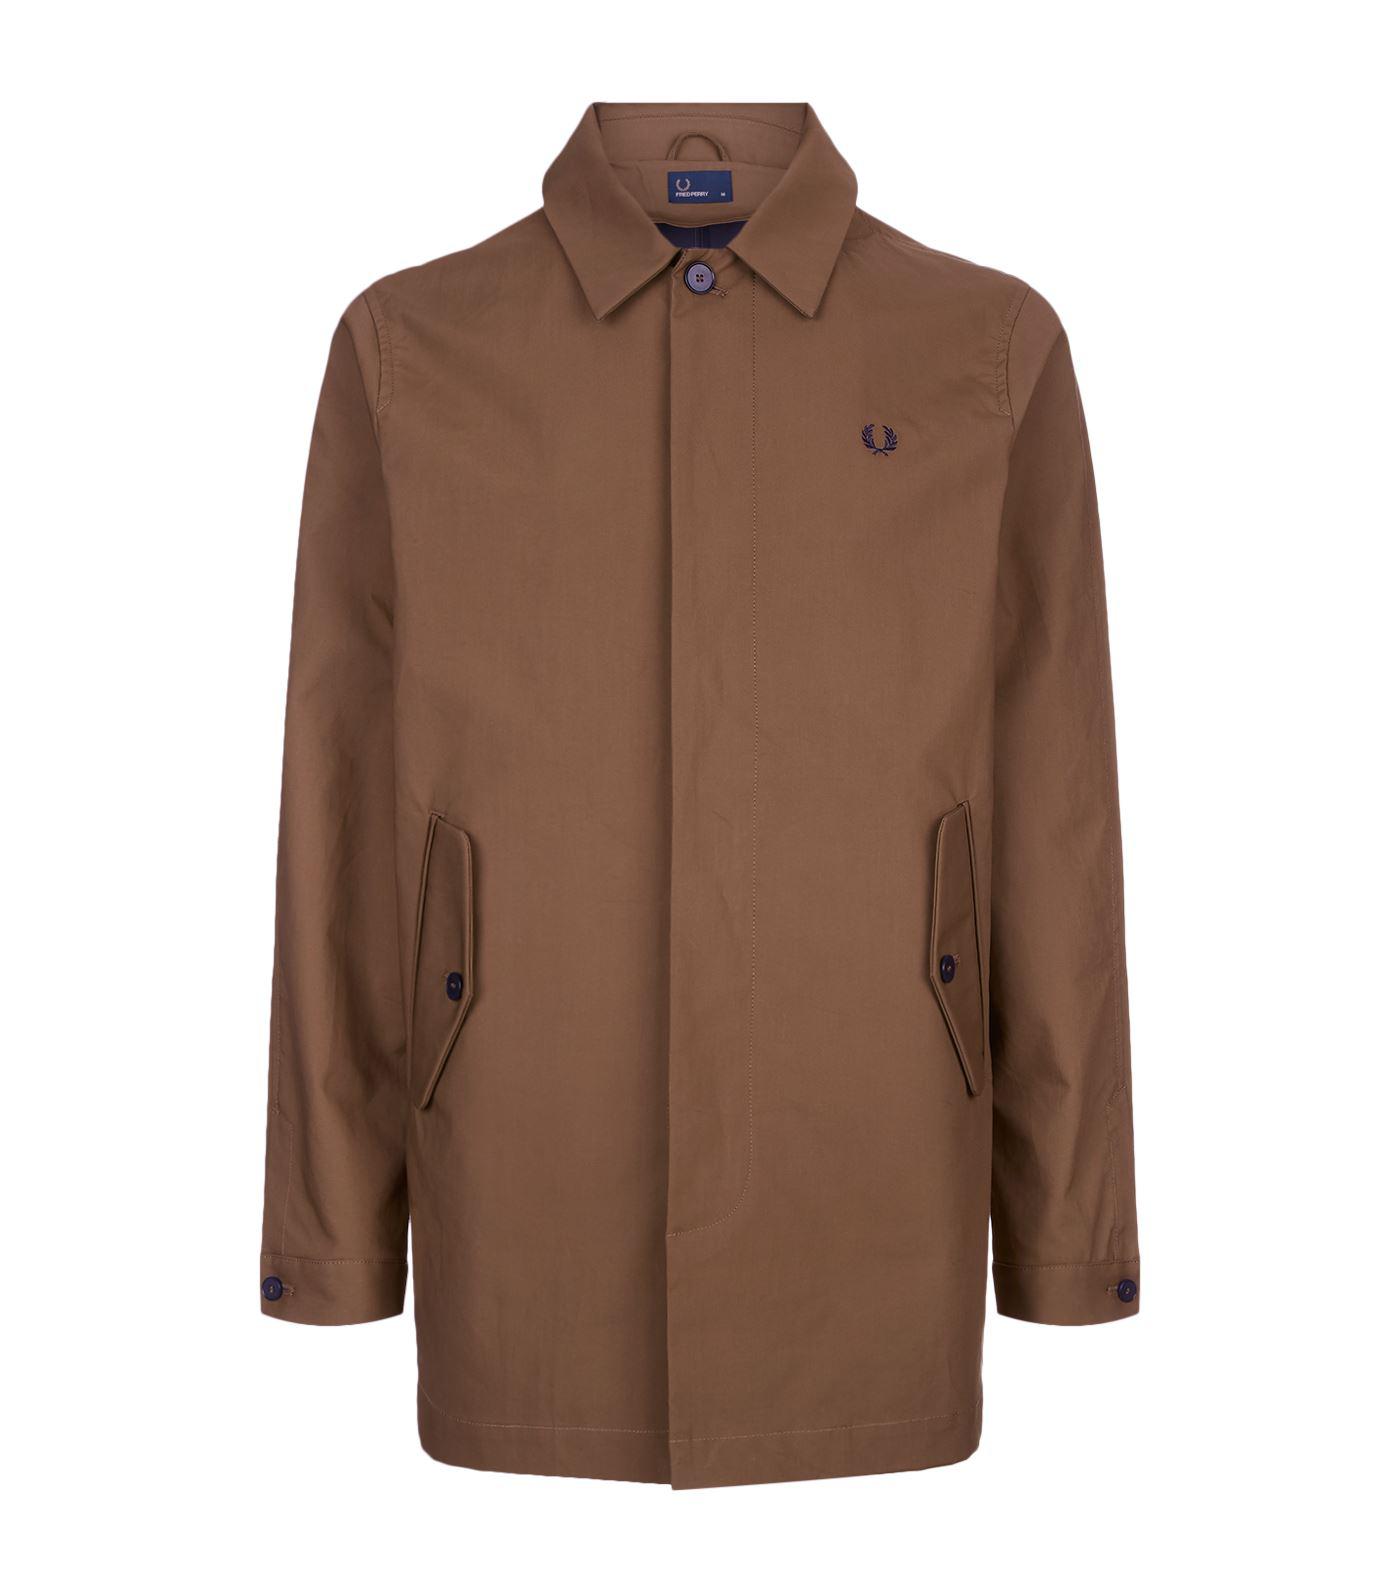 Fred Perry Cotton Caban Mac Jacket in Brown for Men - Lyst